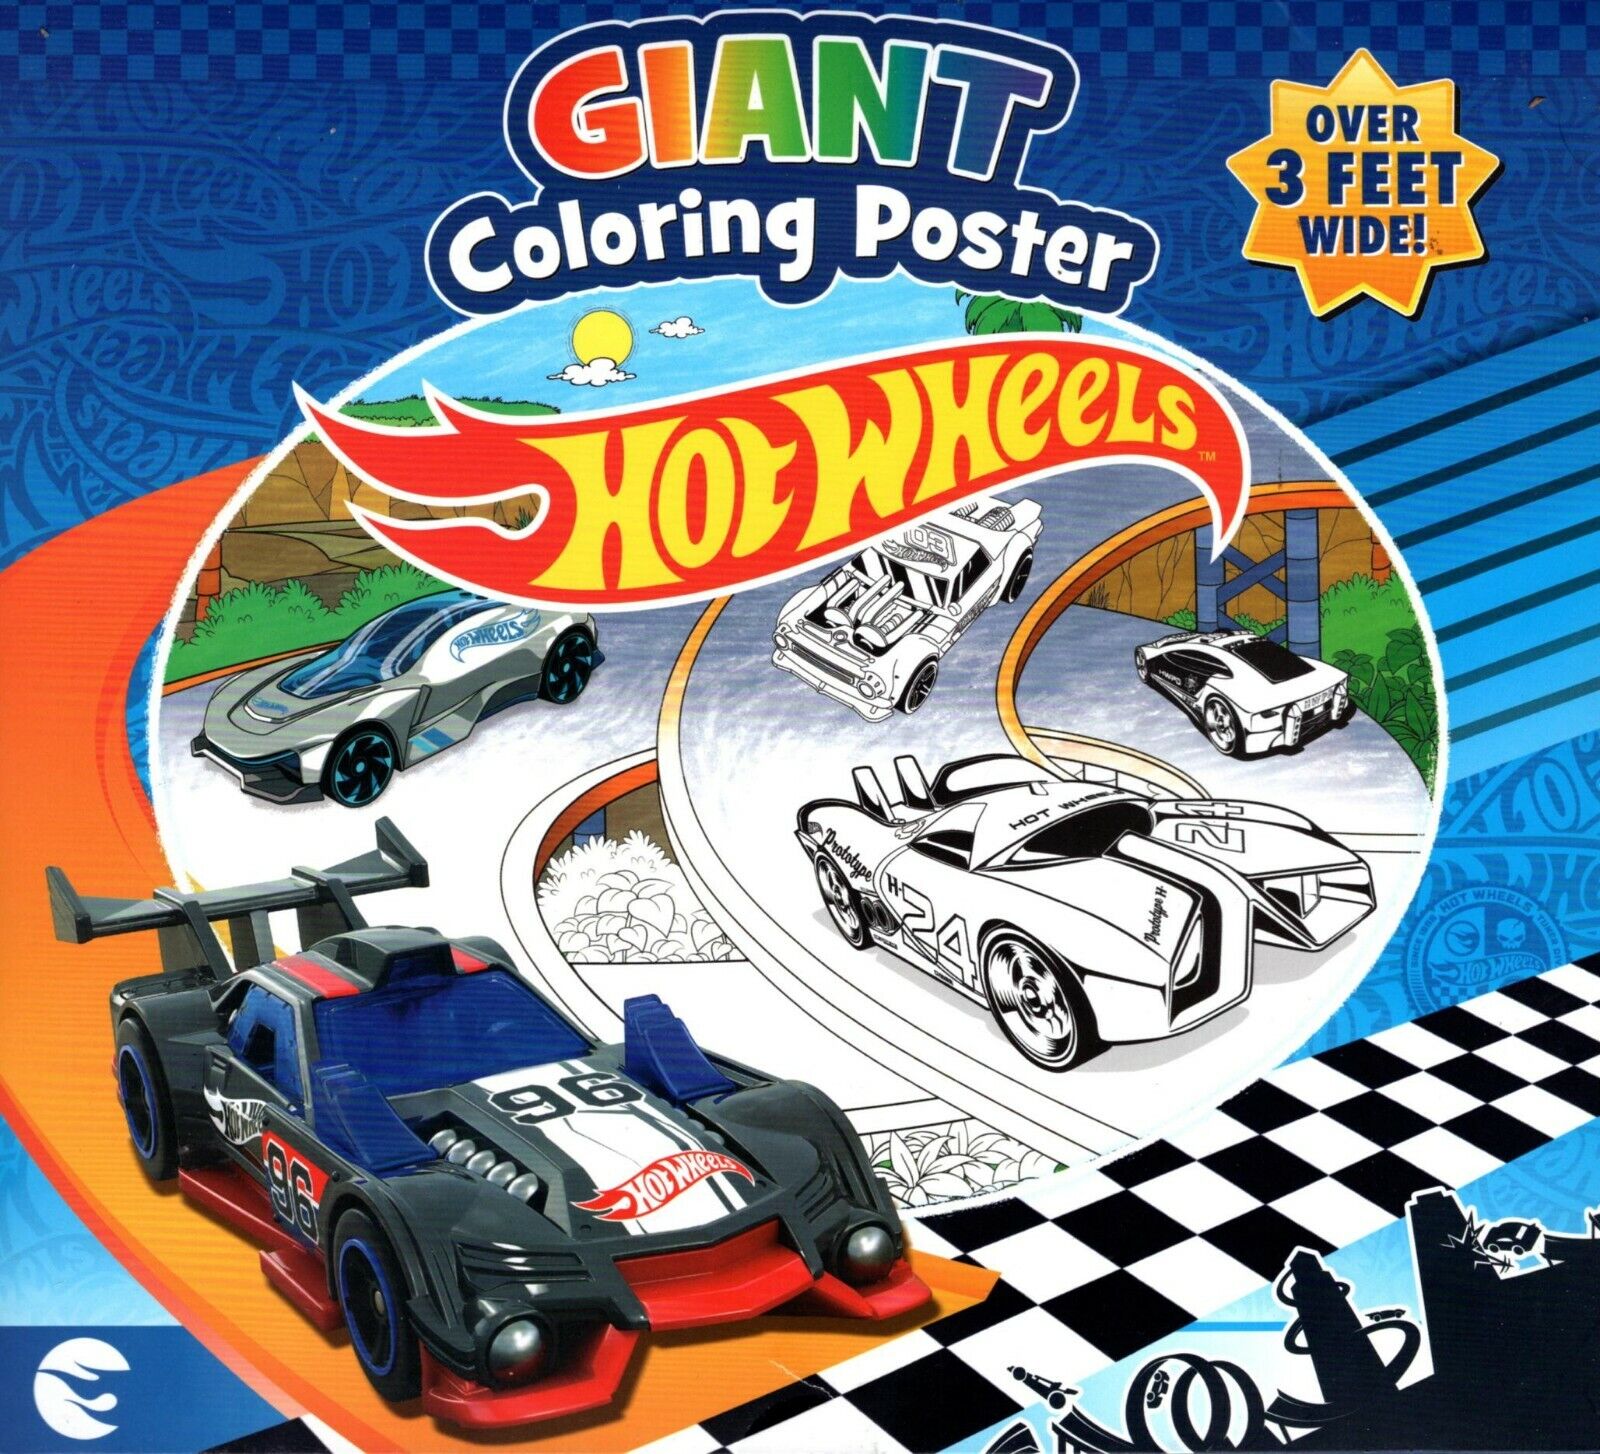 Barbie - Giant Coloring Poster - over 3 Feet Wide